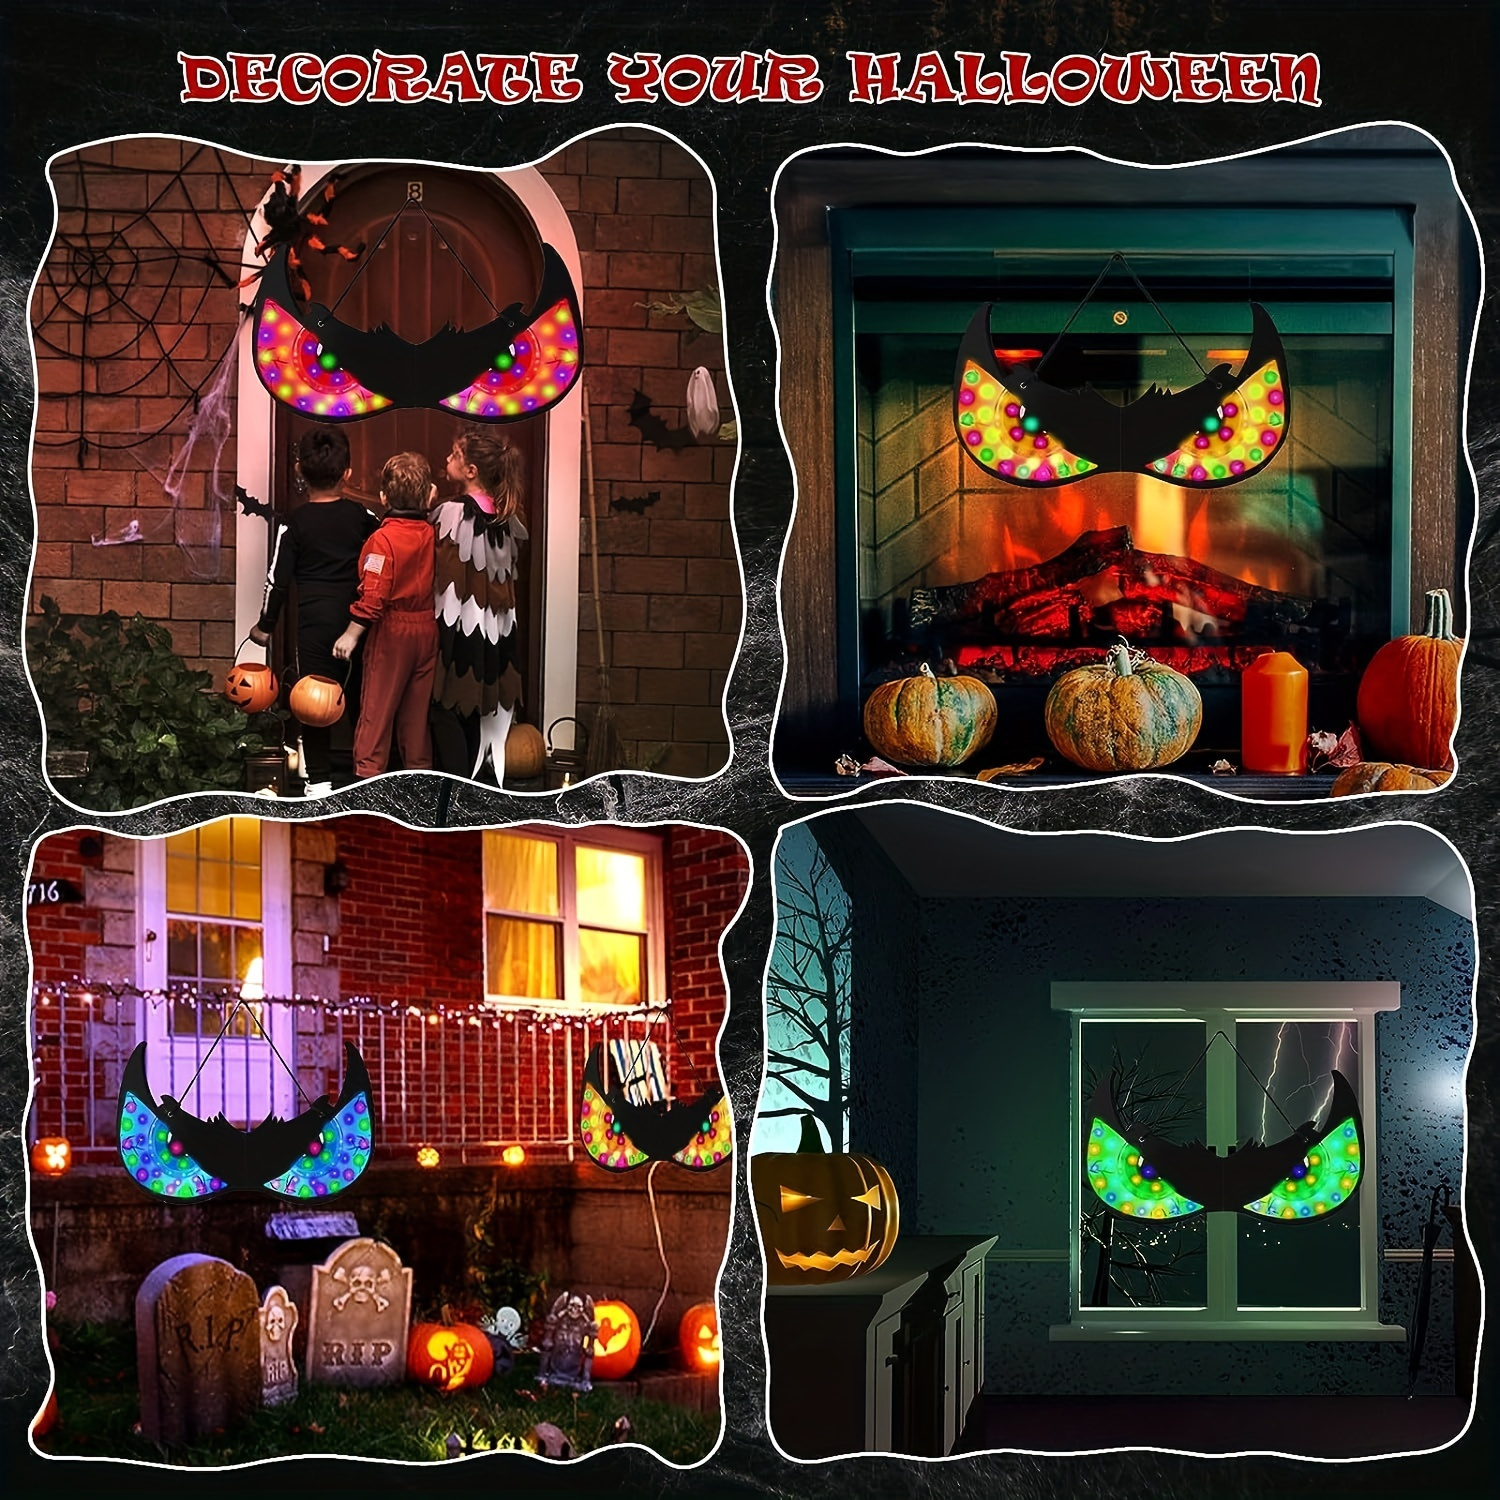 1pc halloween decorations flashing spooky eyes lights hanging eyes window lights with suction cup 50 led light up eyeball for indoor outdoor halloween decoration yard lawn graveyard scenes and party thanksgiving halloween decorations details 0